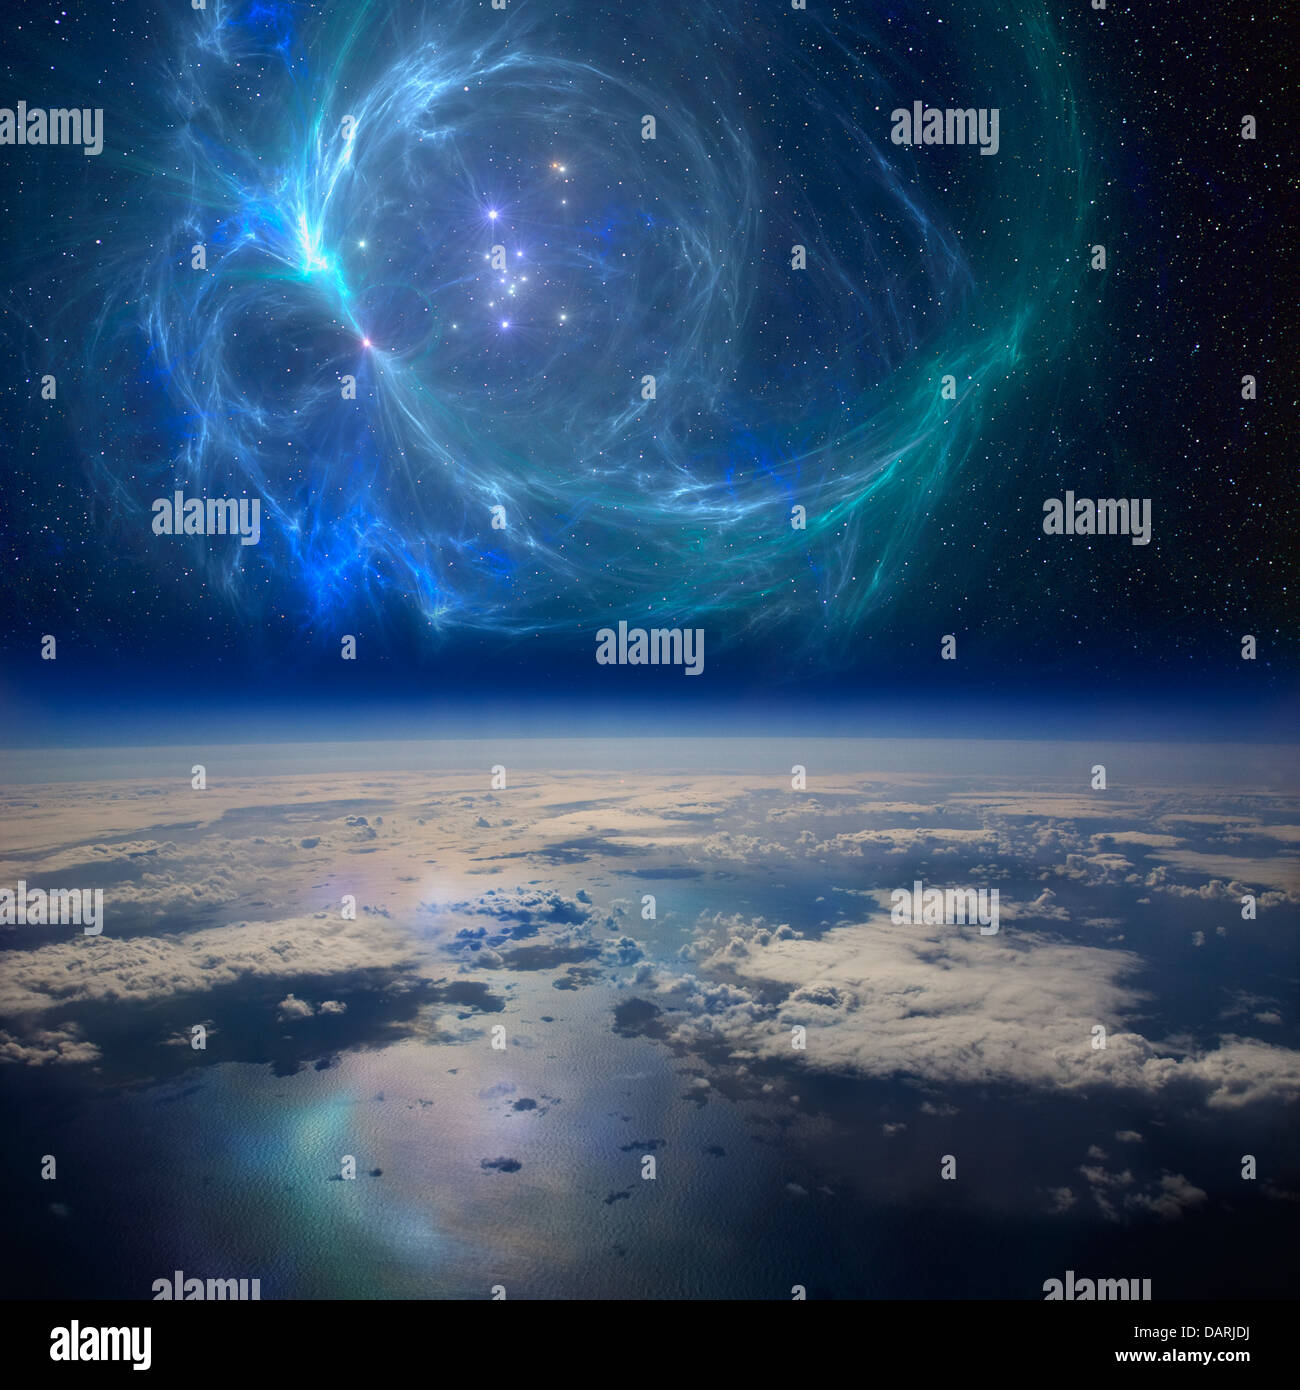 The Earth near a beautiful nebula in space. A conceptual composite image. Stock Photo